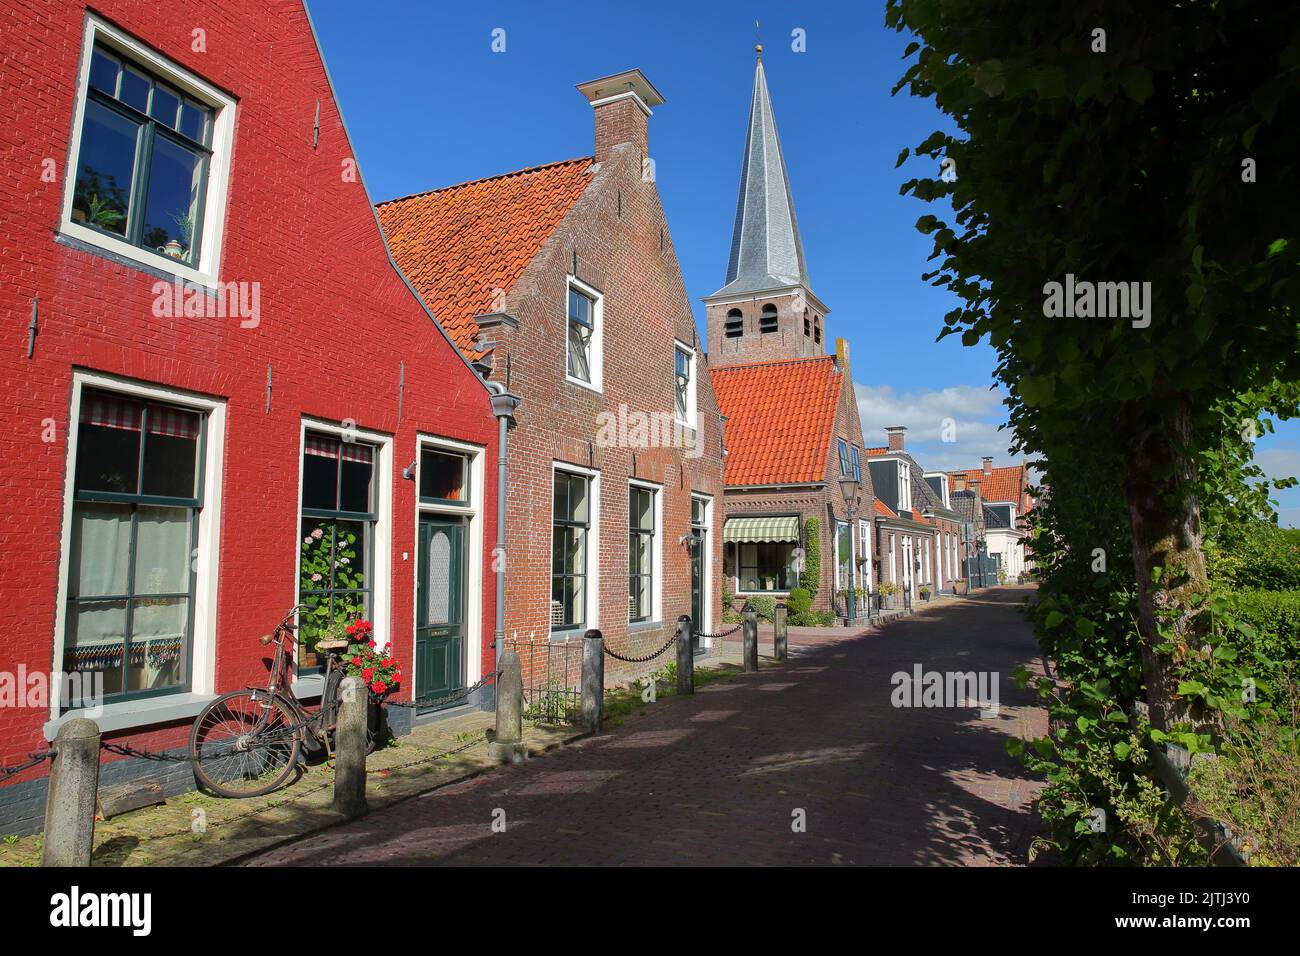 Colorful and historical houses in IJlst, Friesland, Netherlands, with the bell tower of Doopsgezinde kerk church in the background Stock Photo